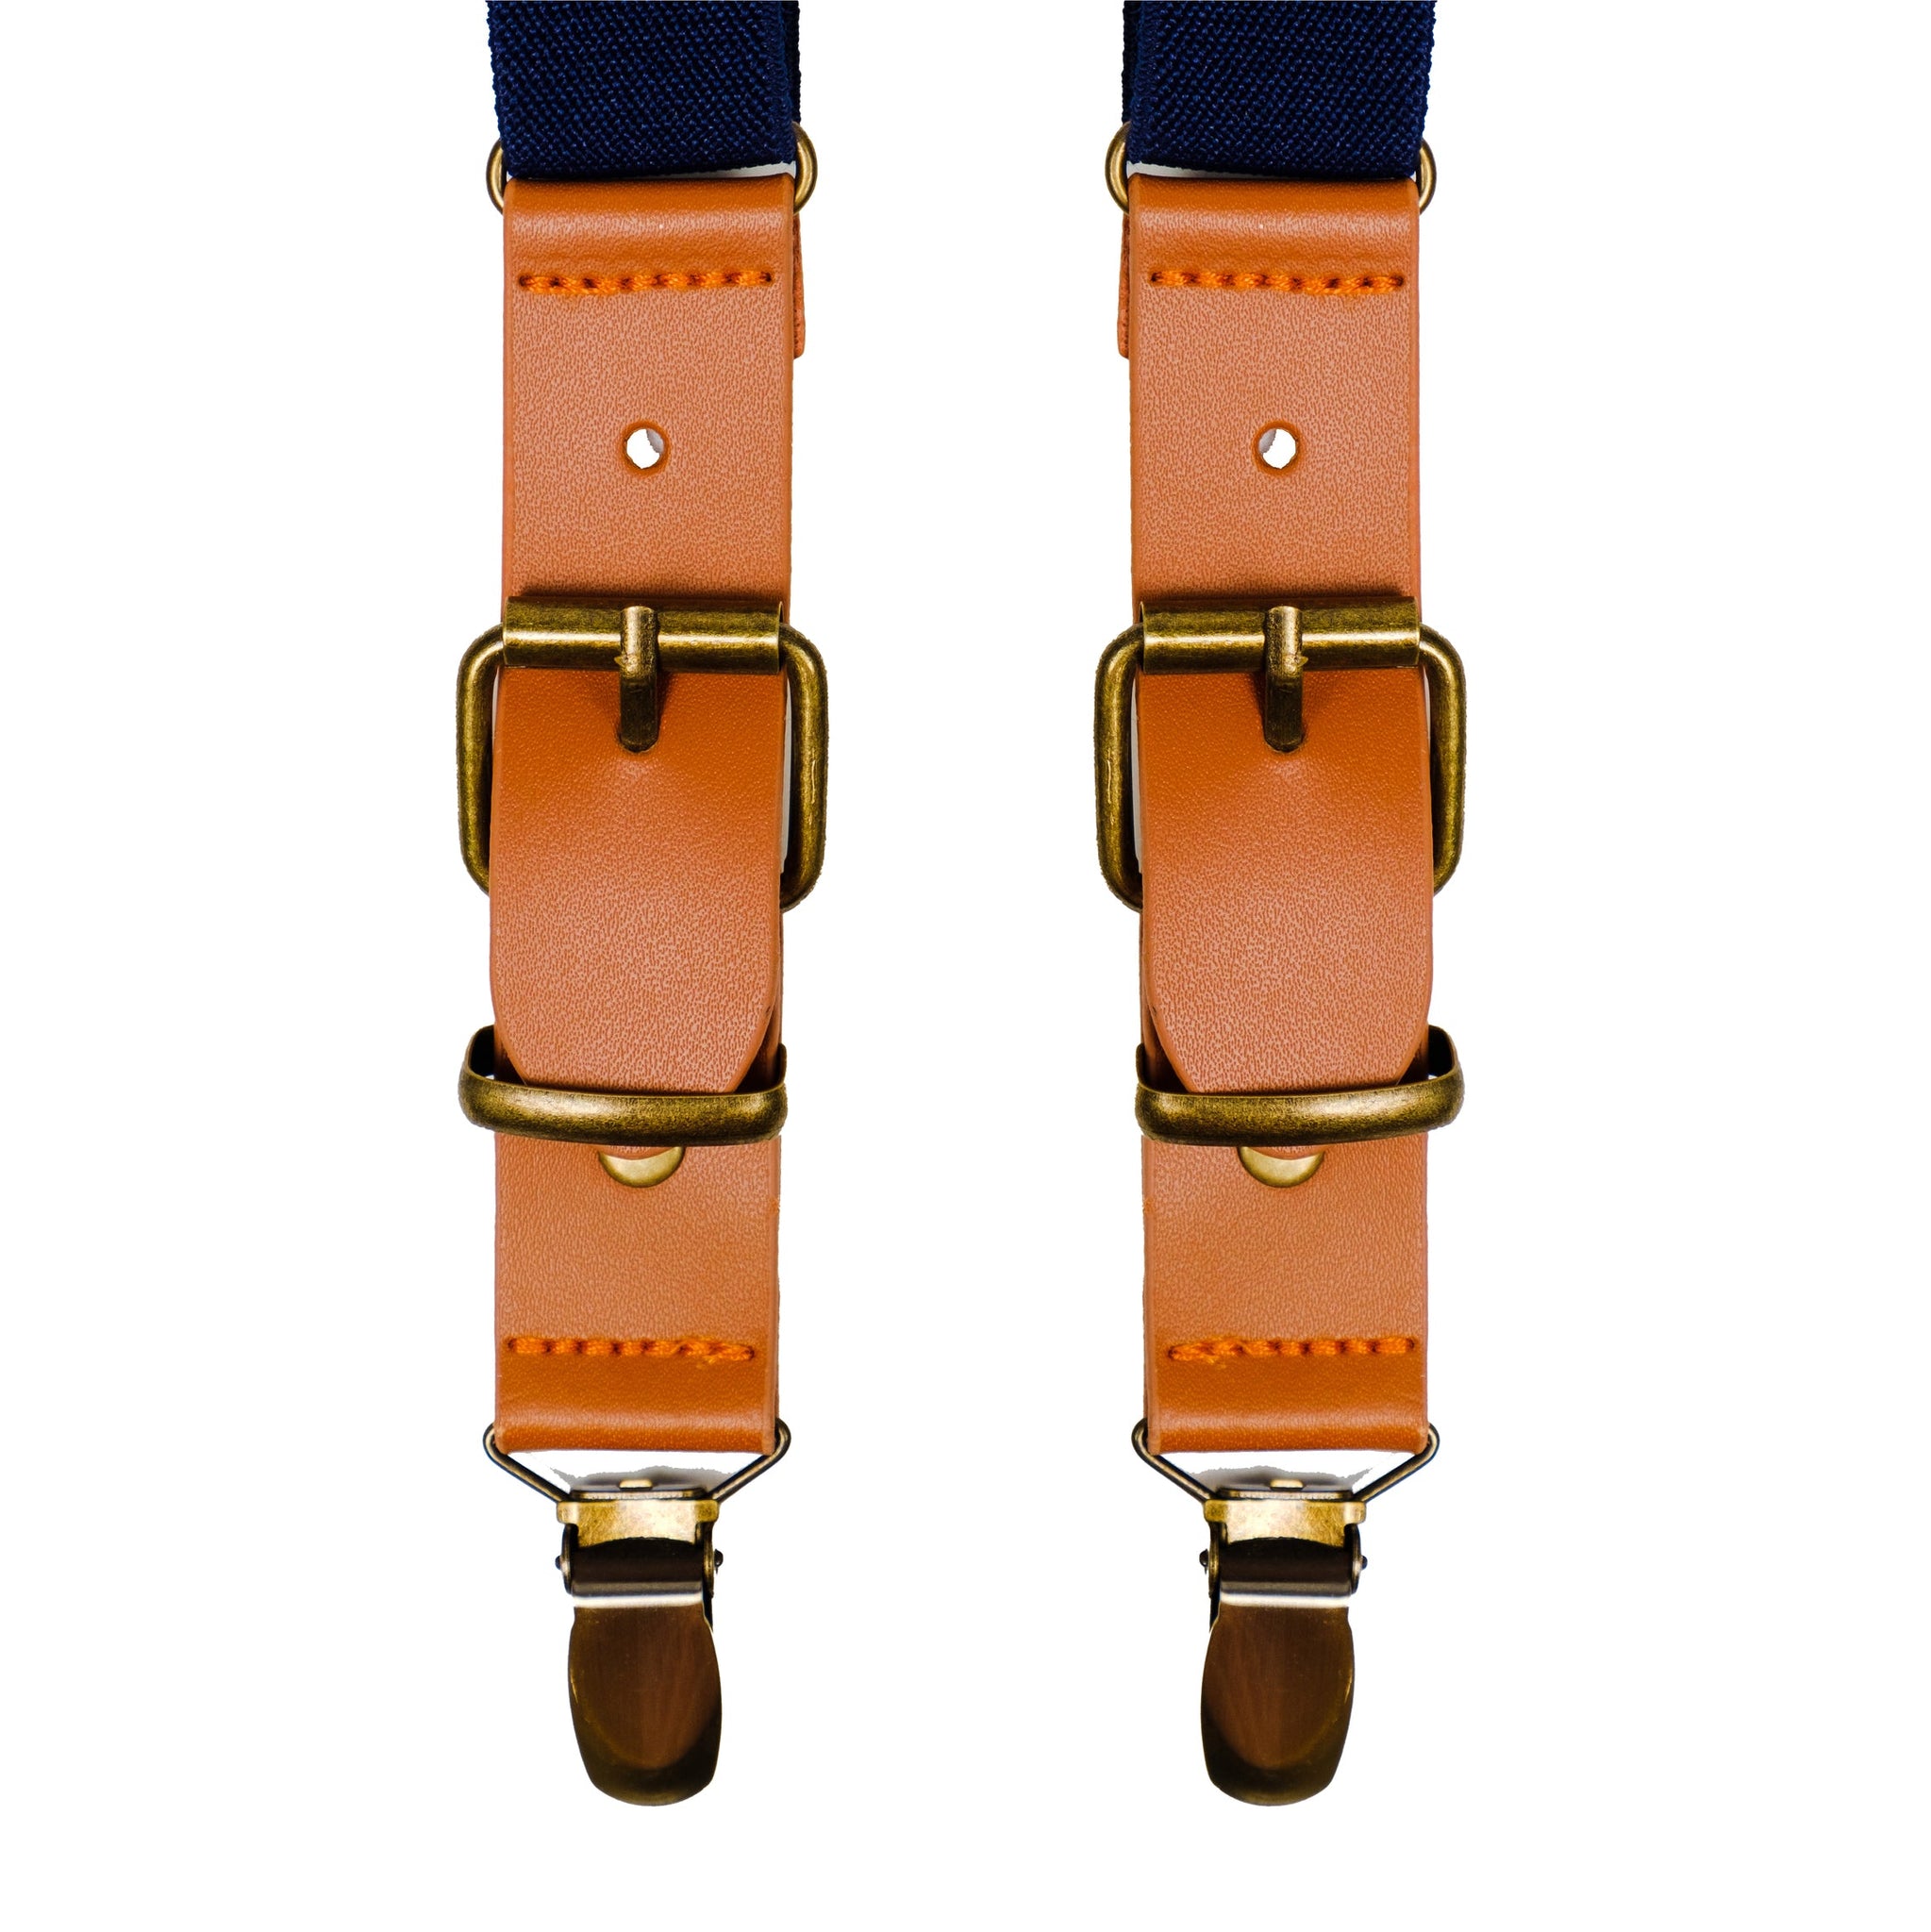 Chokore Y-shaped Suspenders with Leather detailing and adjustable Elastic Strap (Navy Blue)